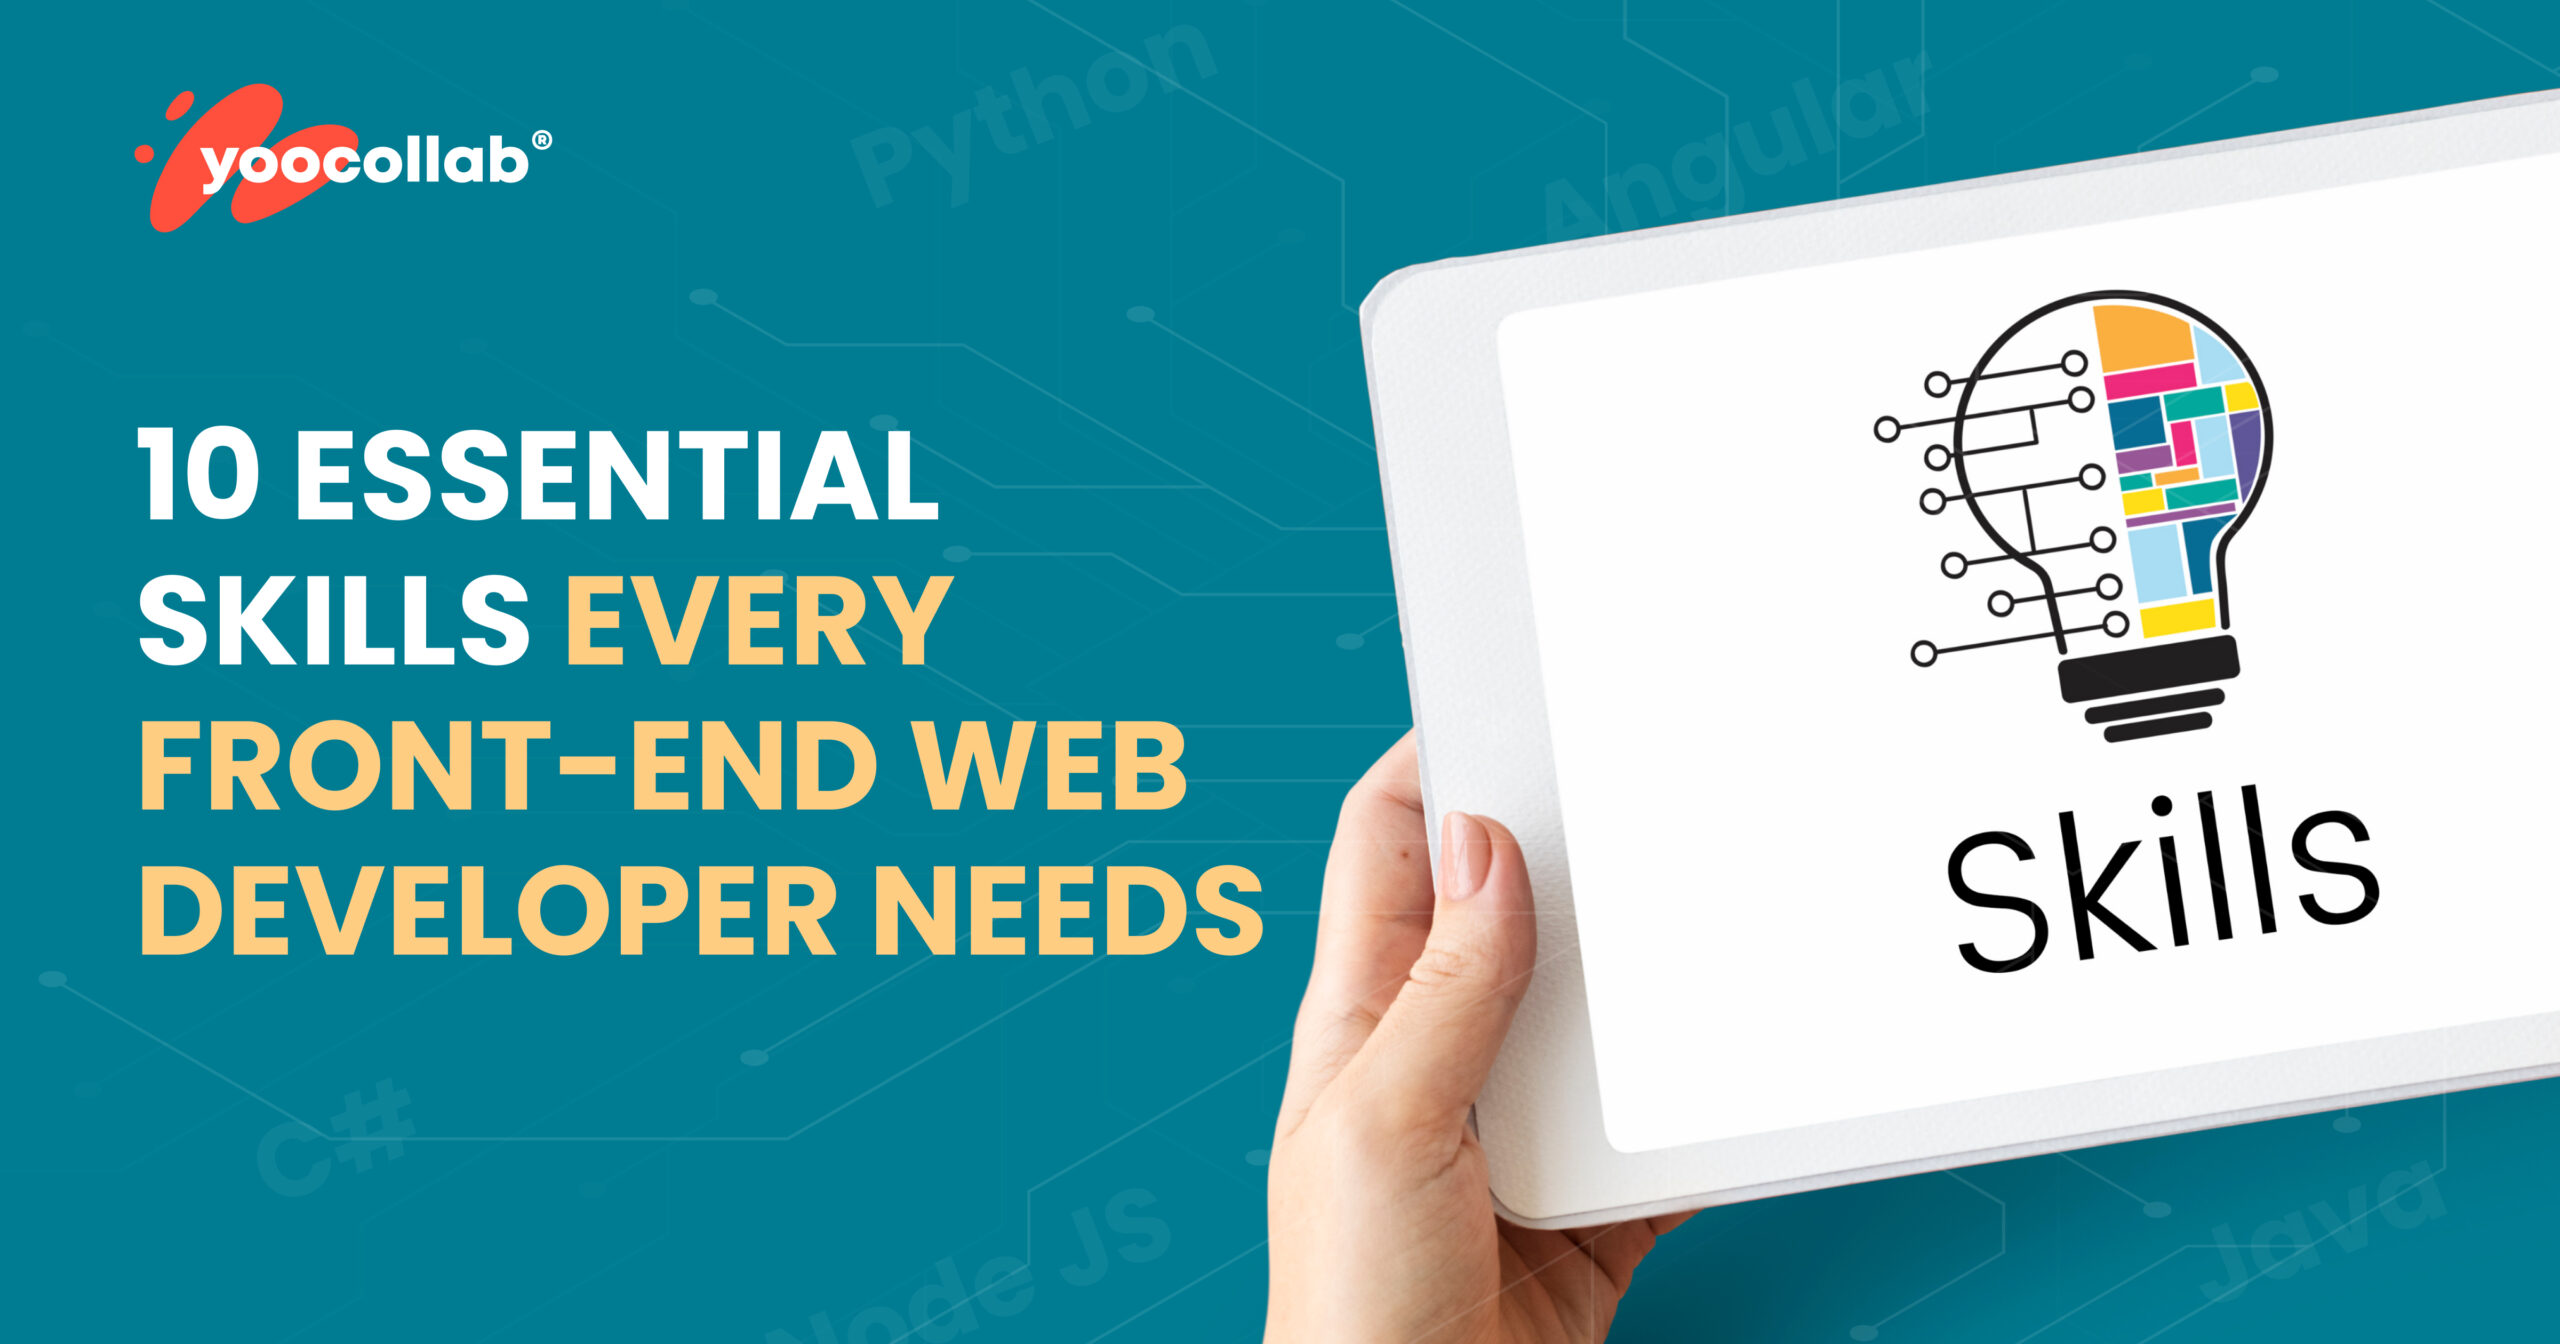 10 Essential Skills Every Front-End Web Developer Needs